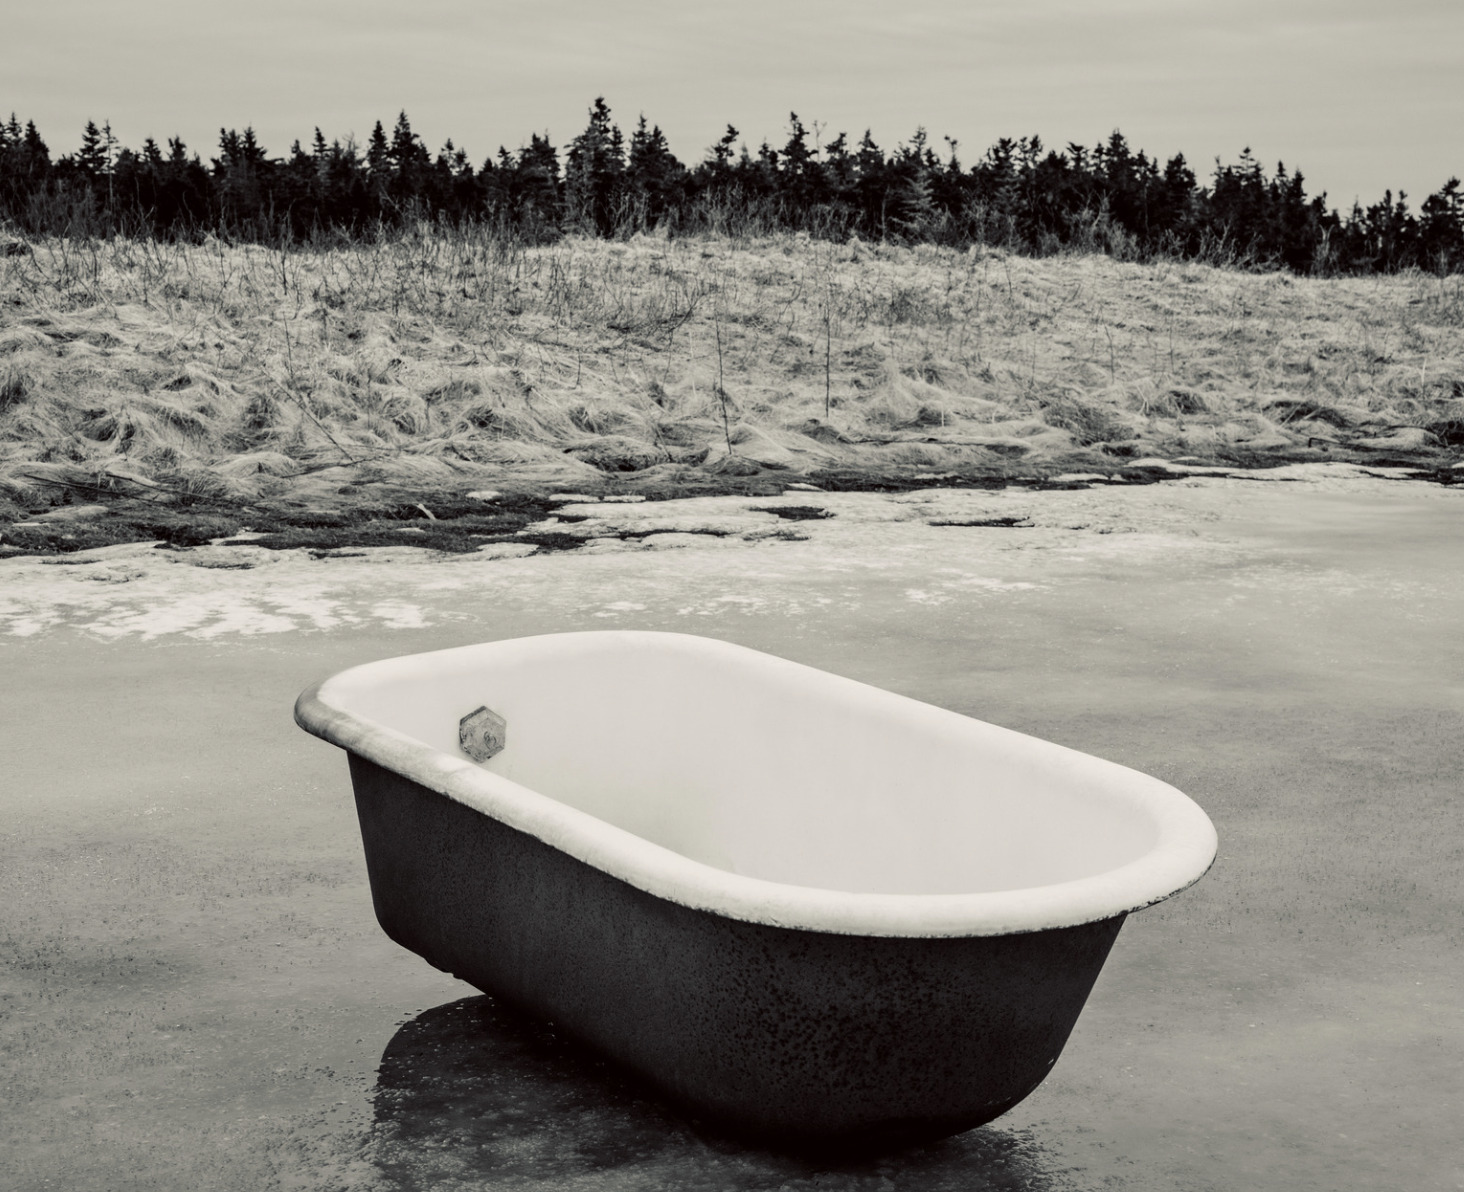 are there benefits of a cold bath in the Winter time?